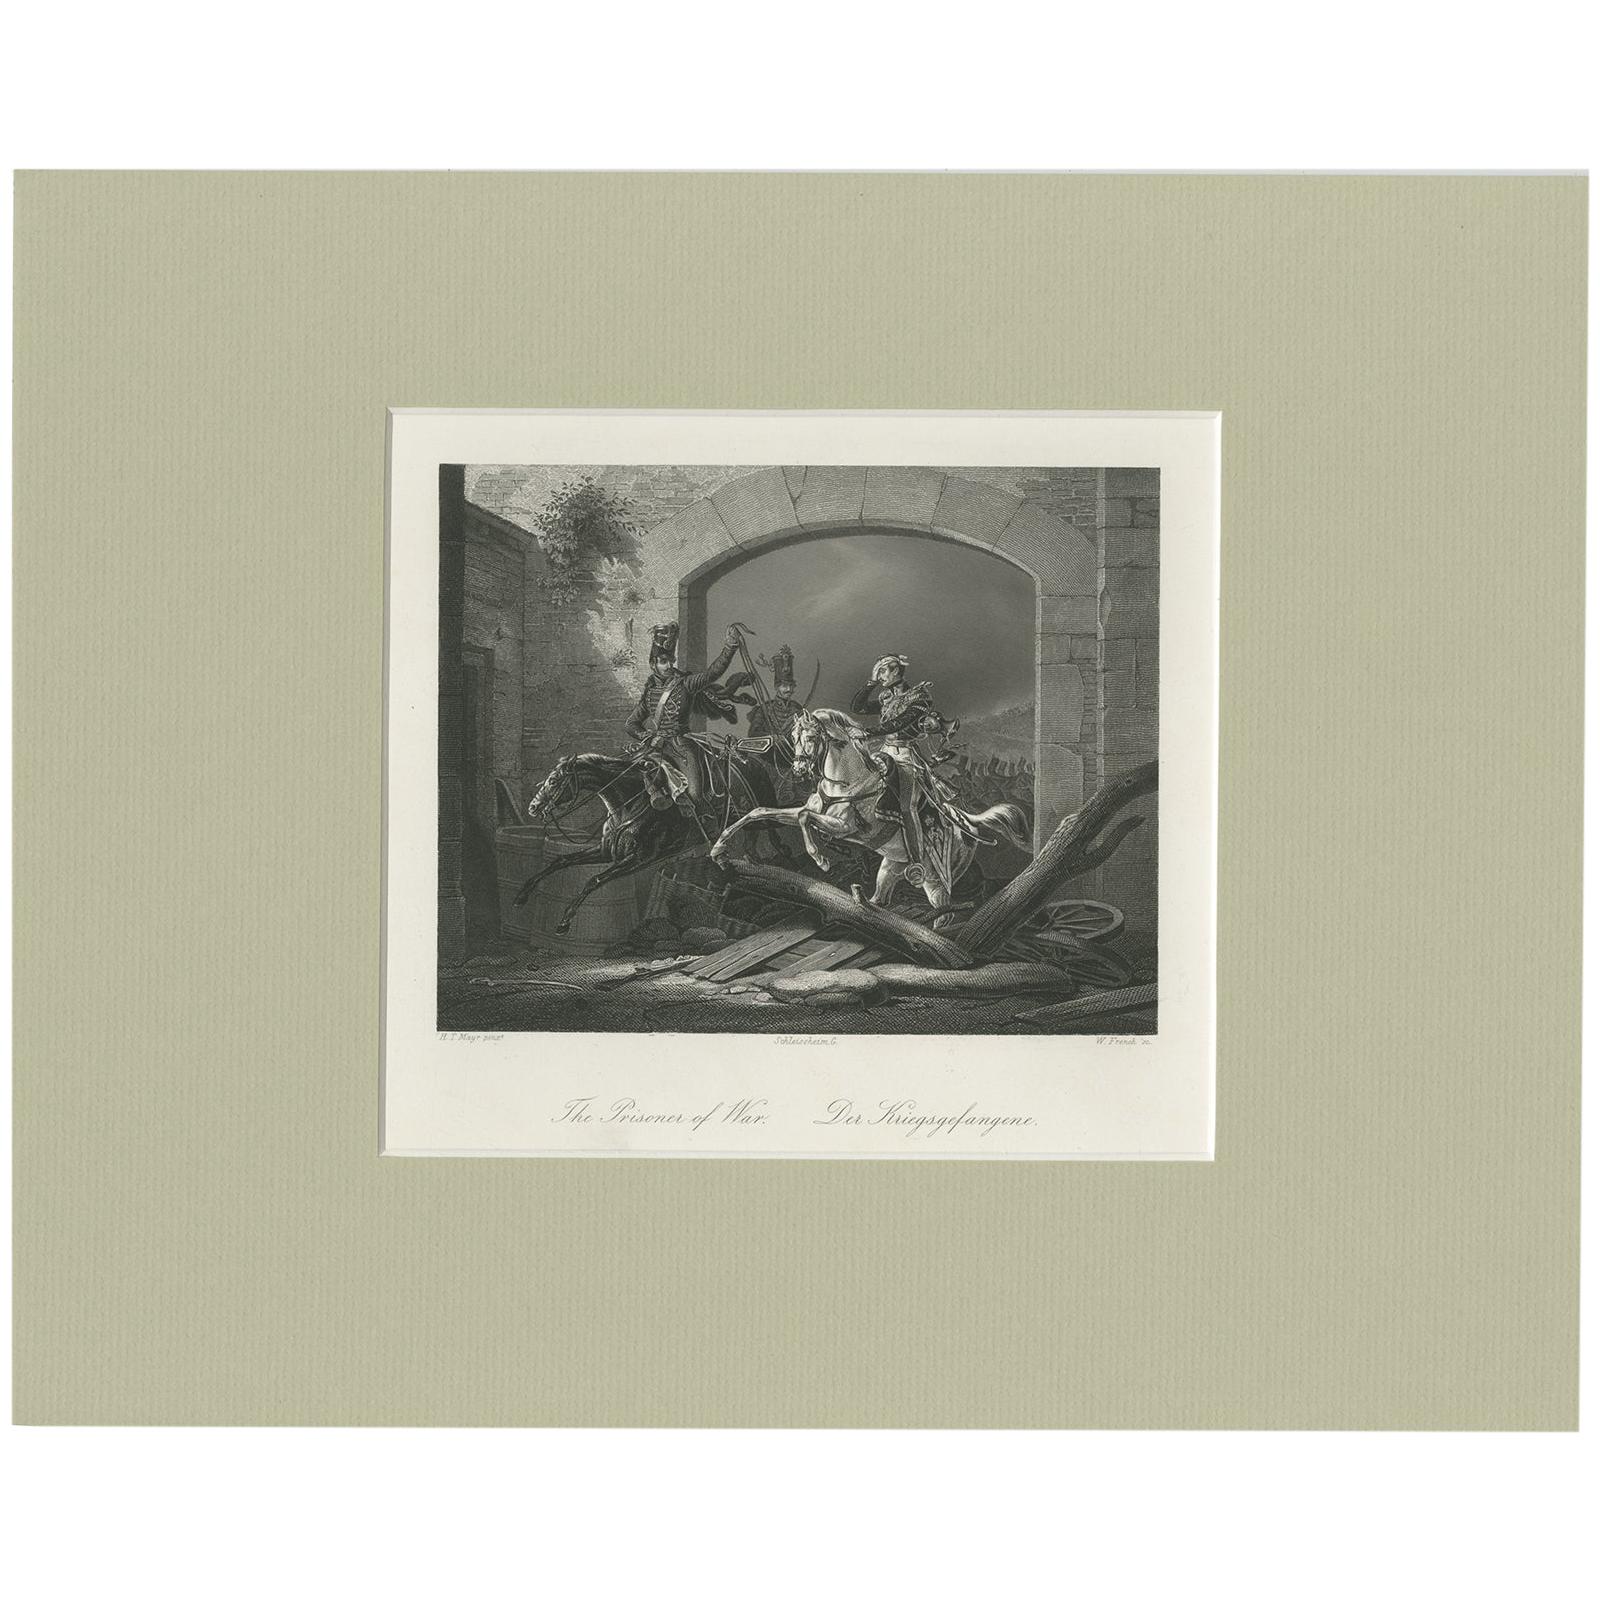 Antique Print 'The Prisoner of War' by W. French, circa 1850